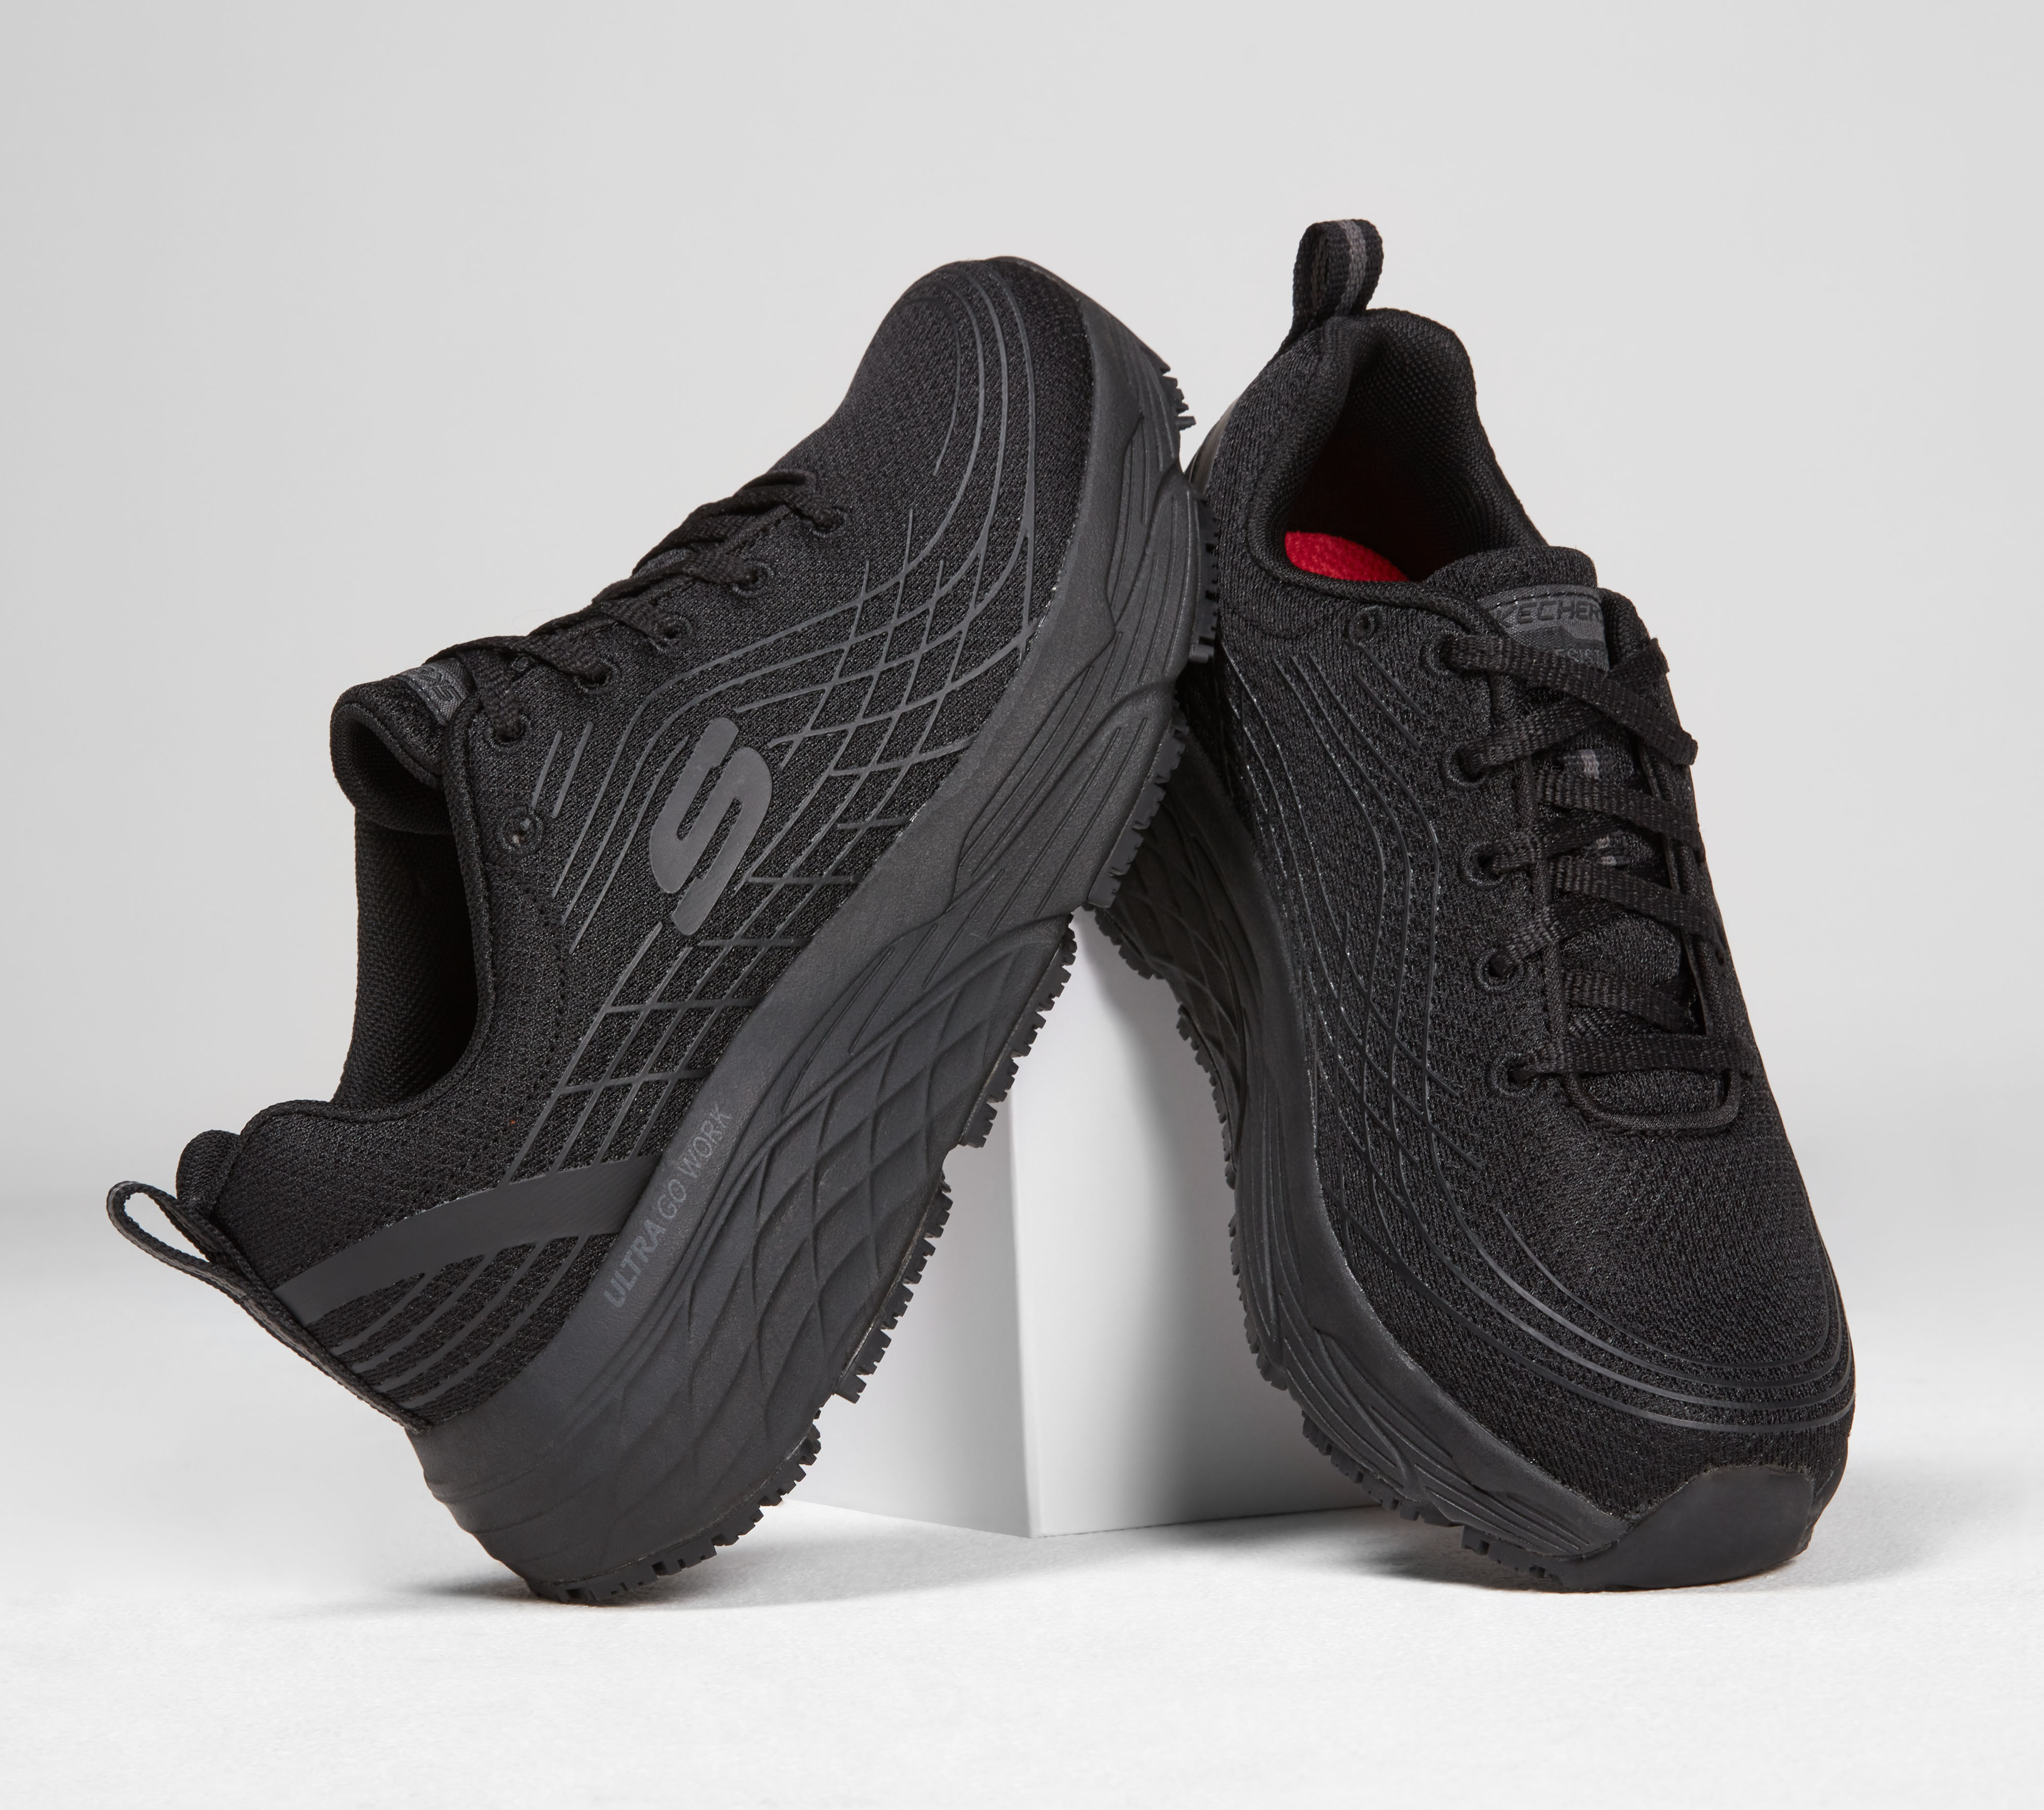 Work Relaxed Elite Cushioning Fit: Max | SR SKECHERS